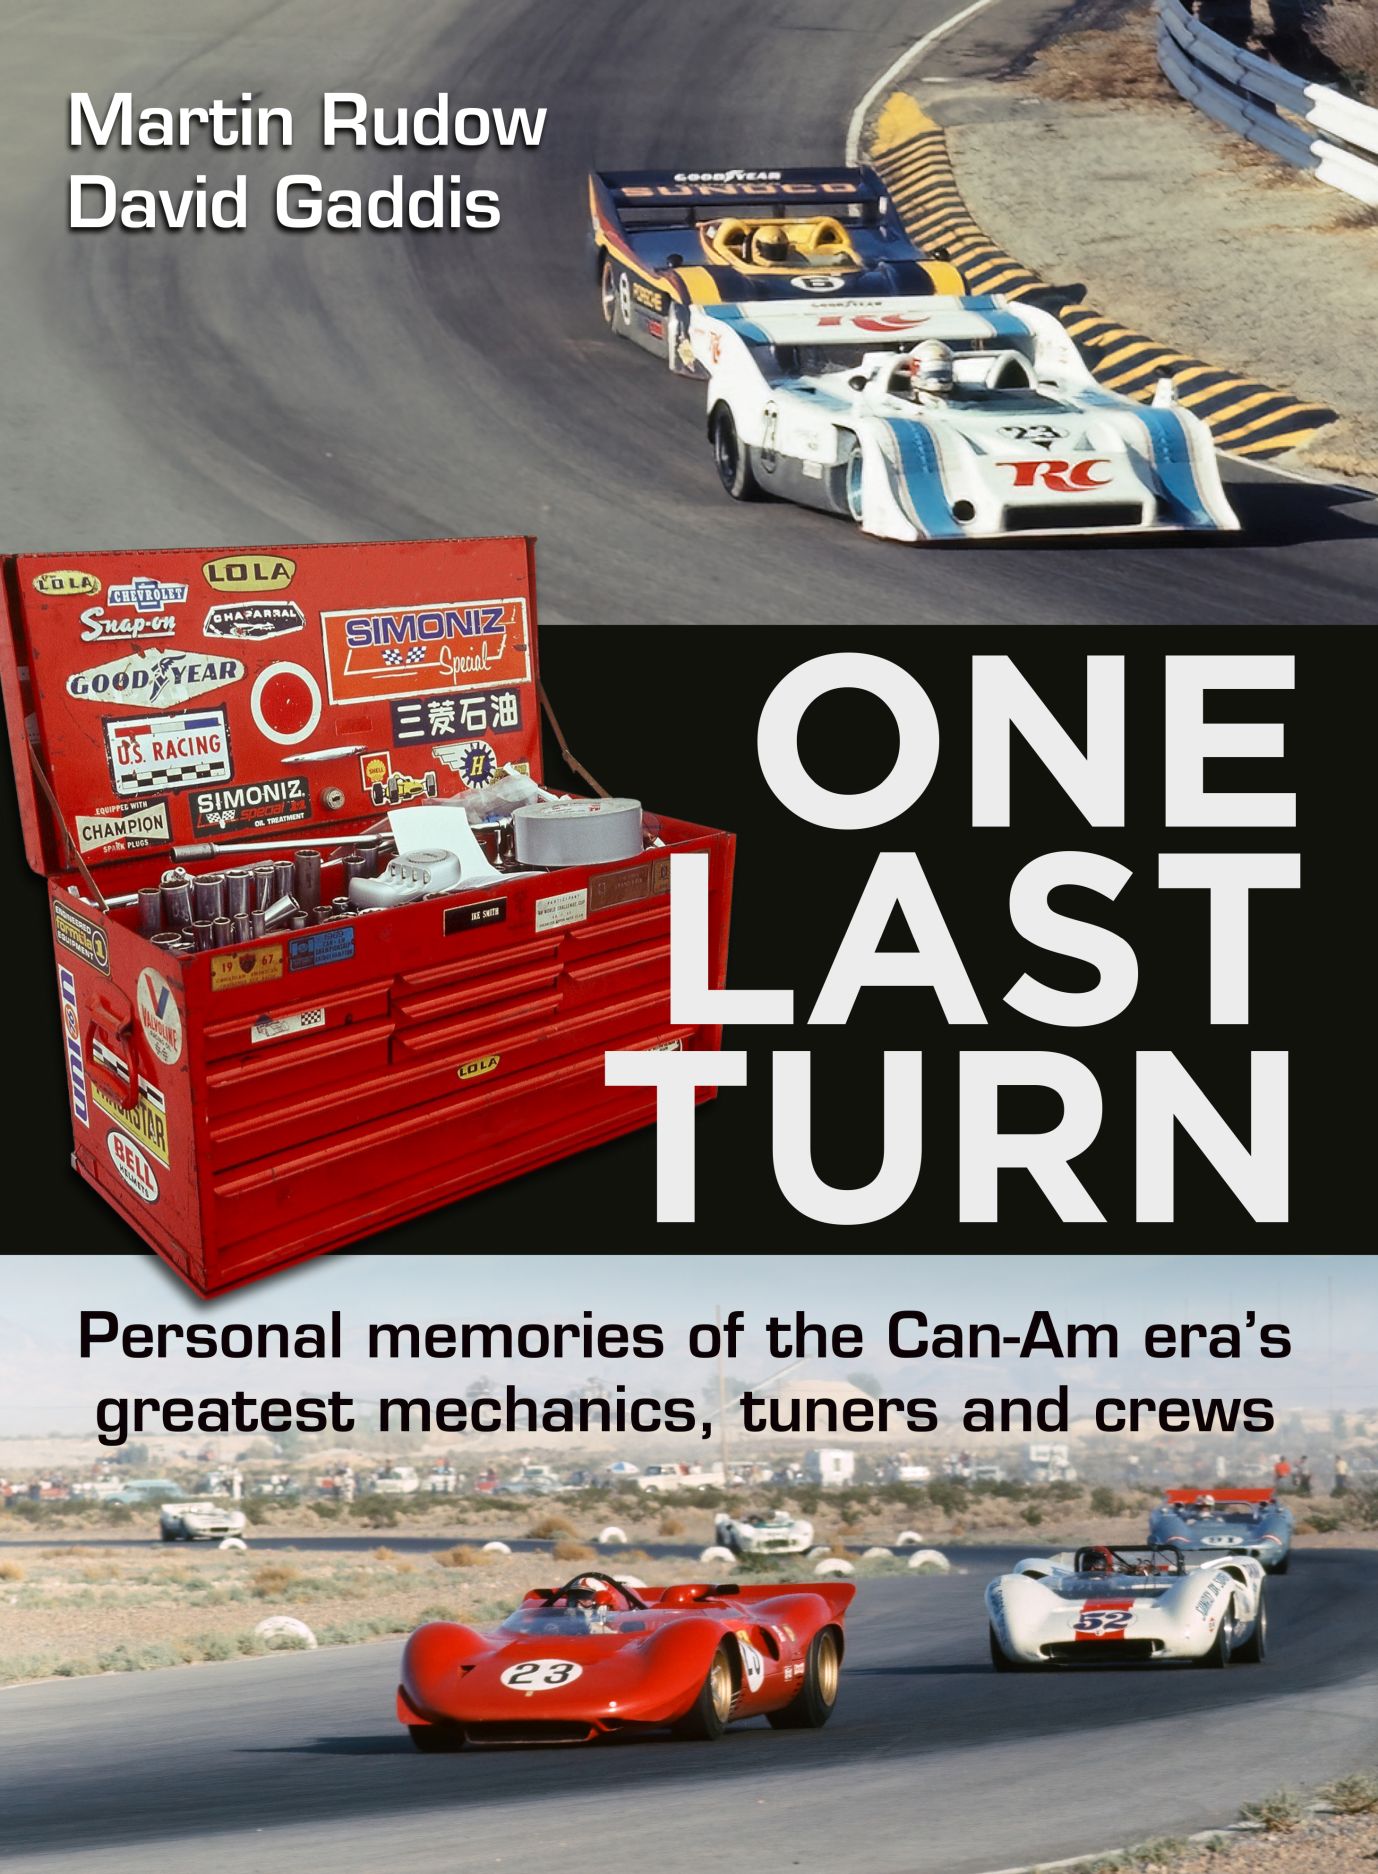 One Last Turn: Personal memories of the Can-Am era\'s greatest mechanics,  tuners and crews, Rudow, Gaddis